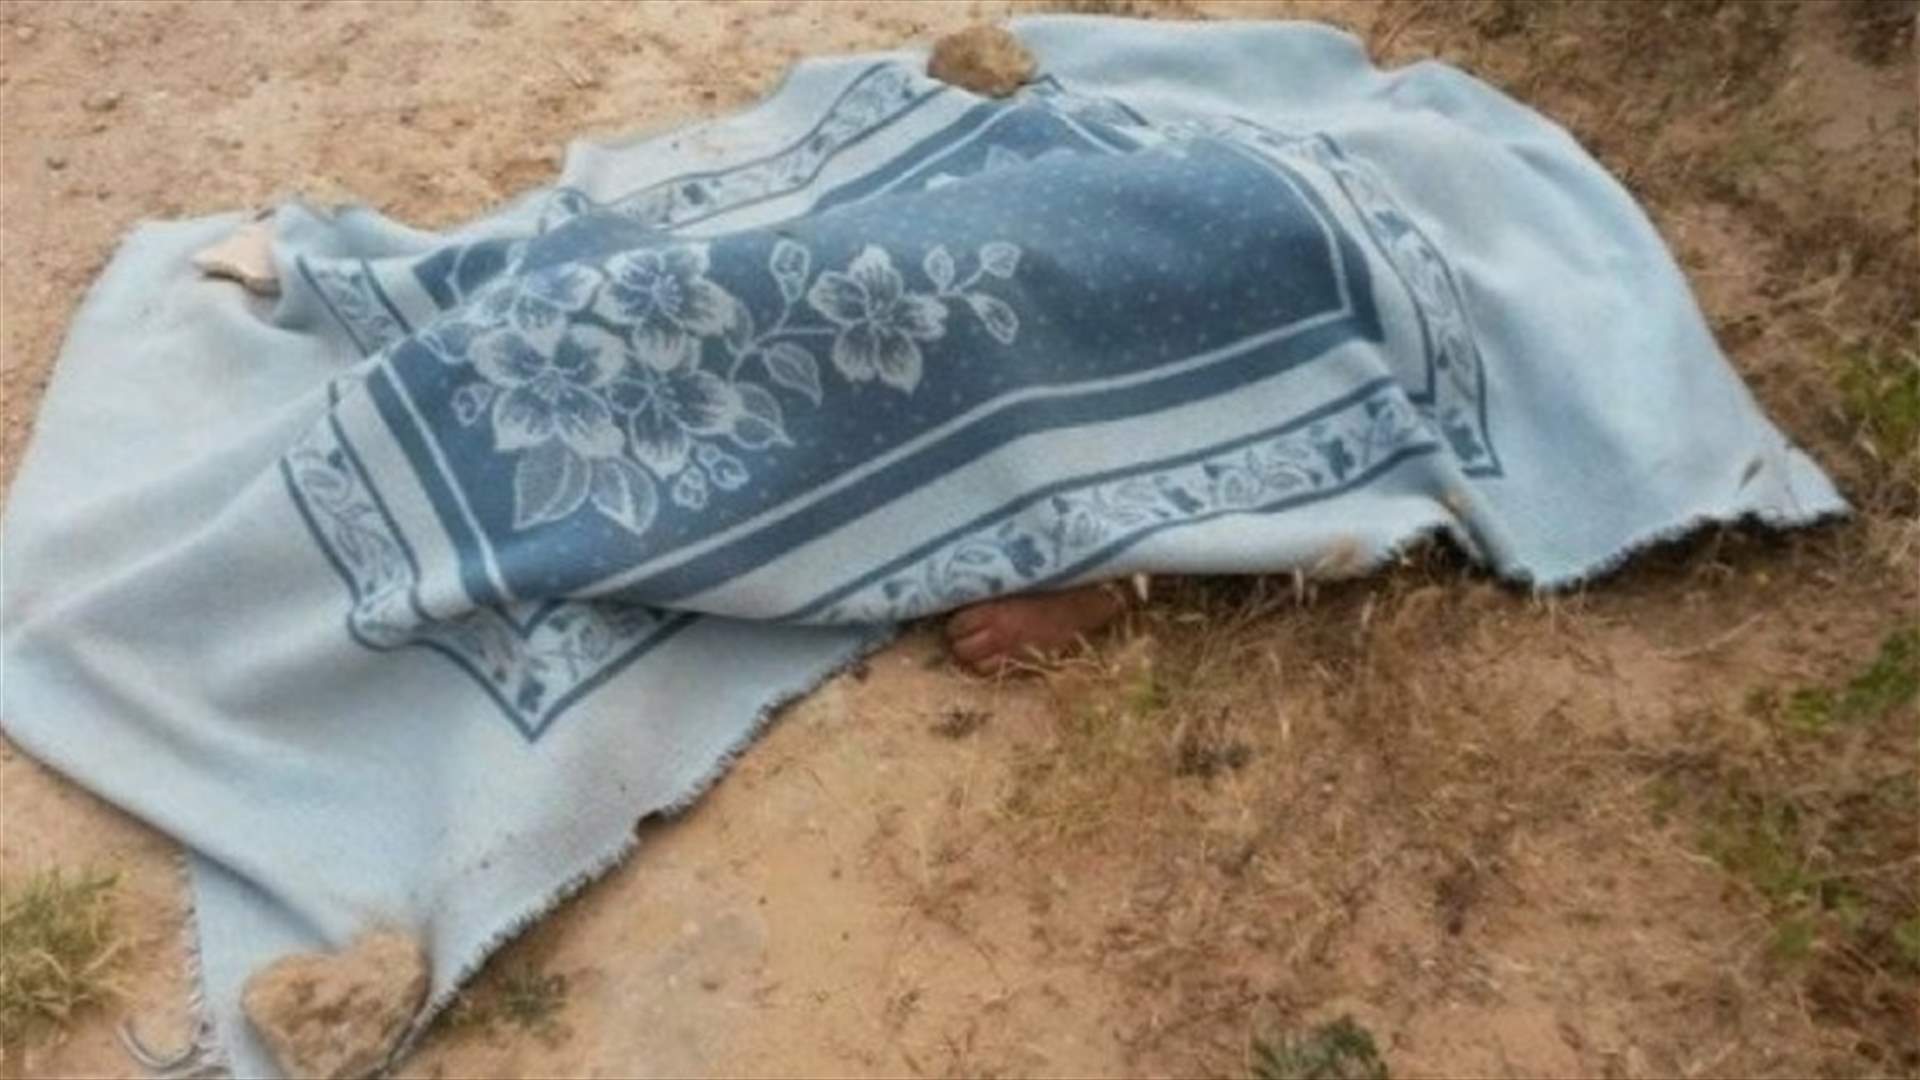 Toddler dead after being run over by tractor